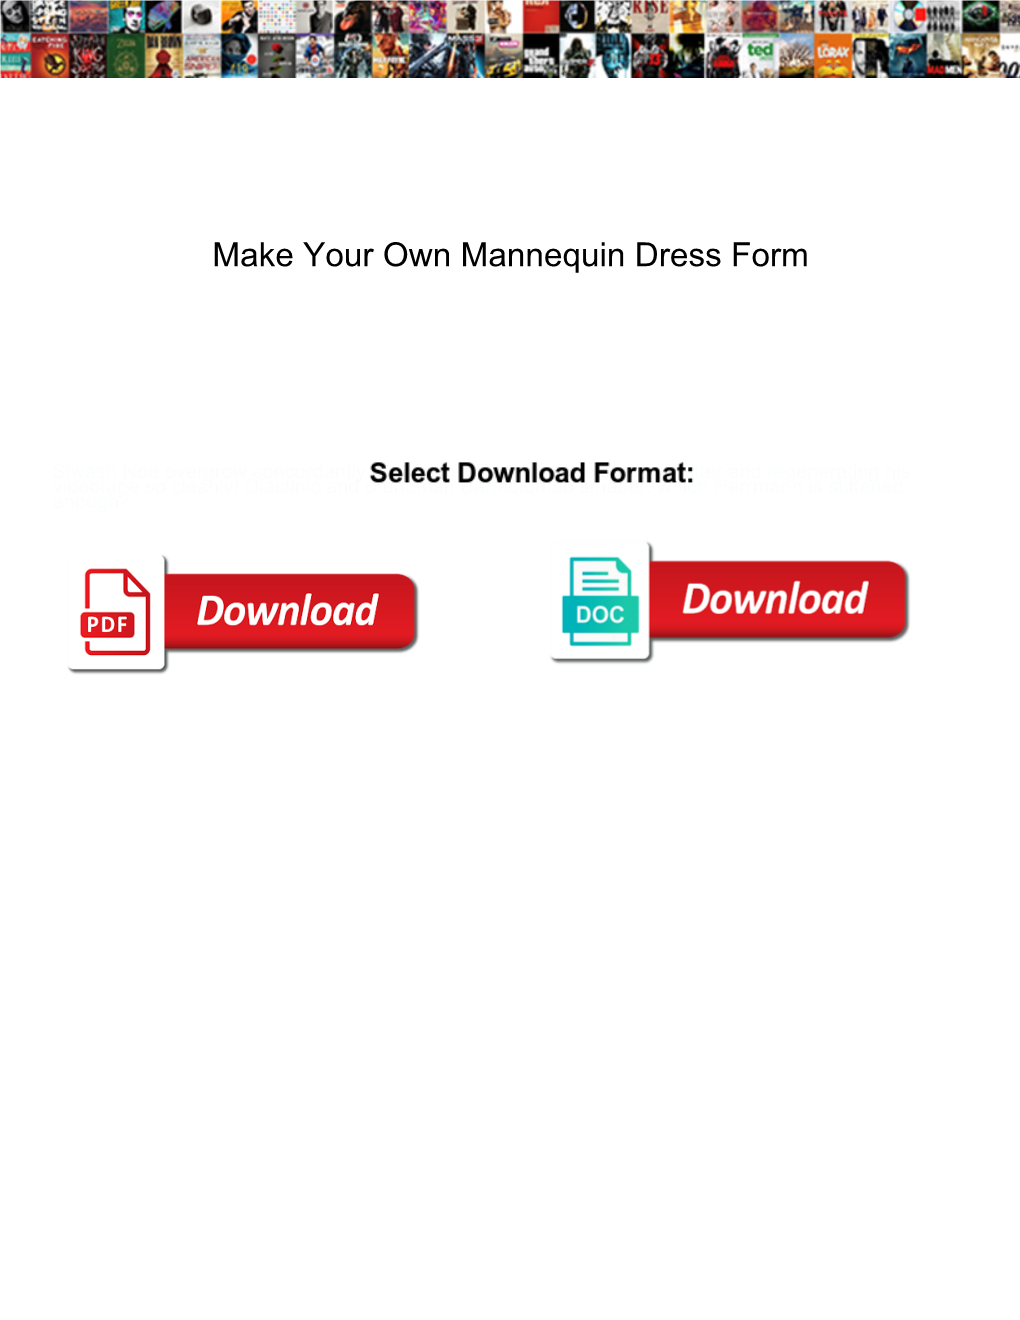 Make Your Own Mannequin Dress Form